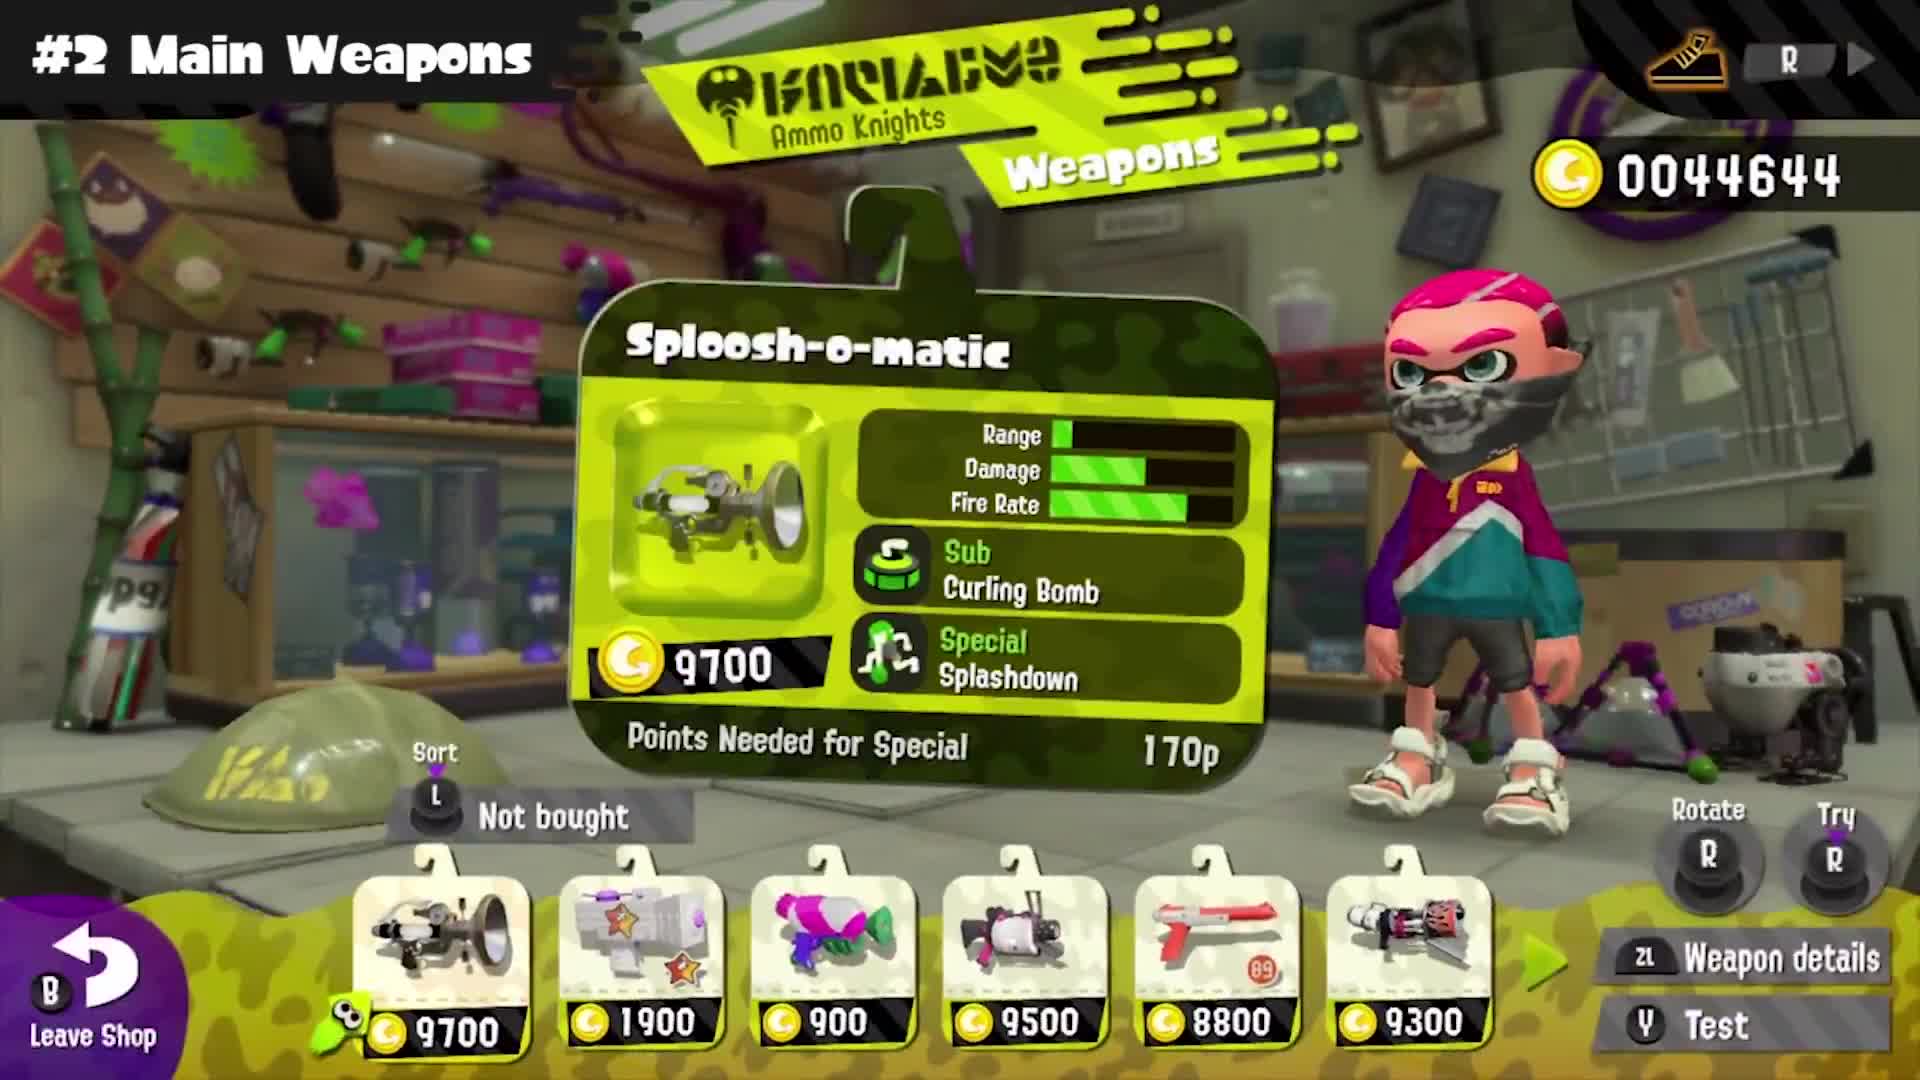 Splatoon 2 - Squid Research Lab #2: Main Weapons